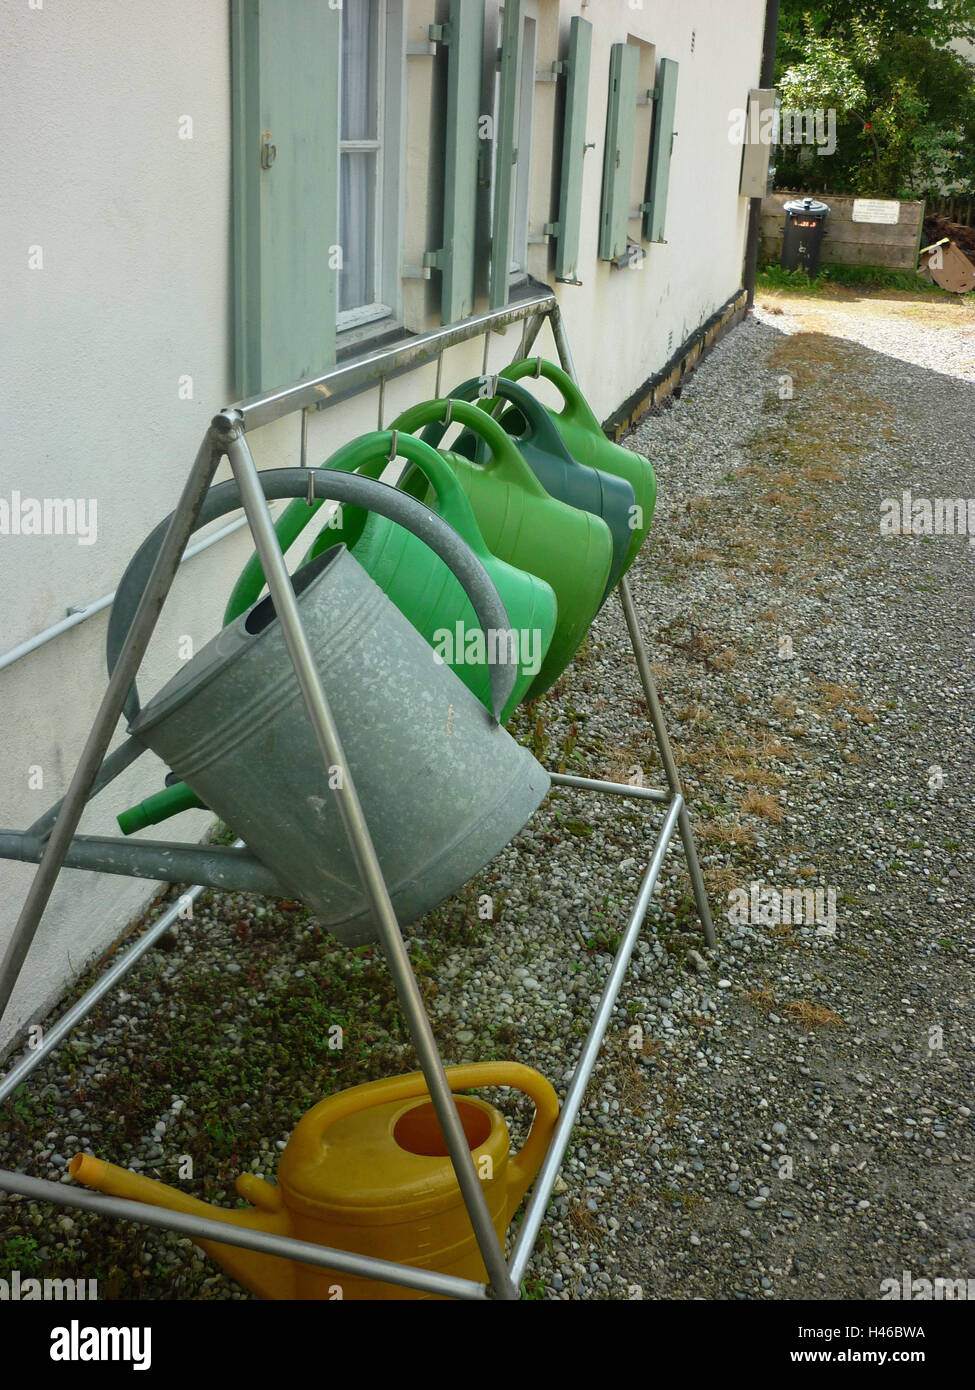 Cemetery, watering cans, tin watering can, plastic watering cans, device, hang, cemetery watering cans, pots, green, icon, conception, tomb care, gardening, water, cast, Blumengießen, Stock Photo